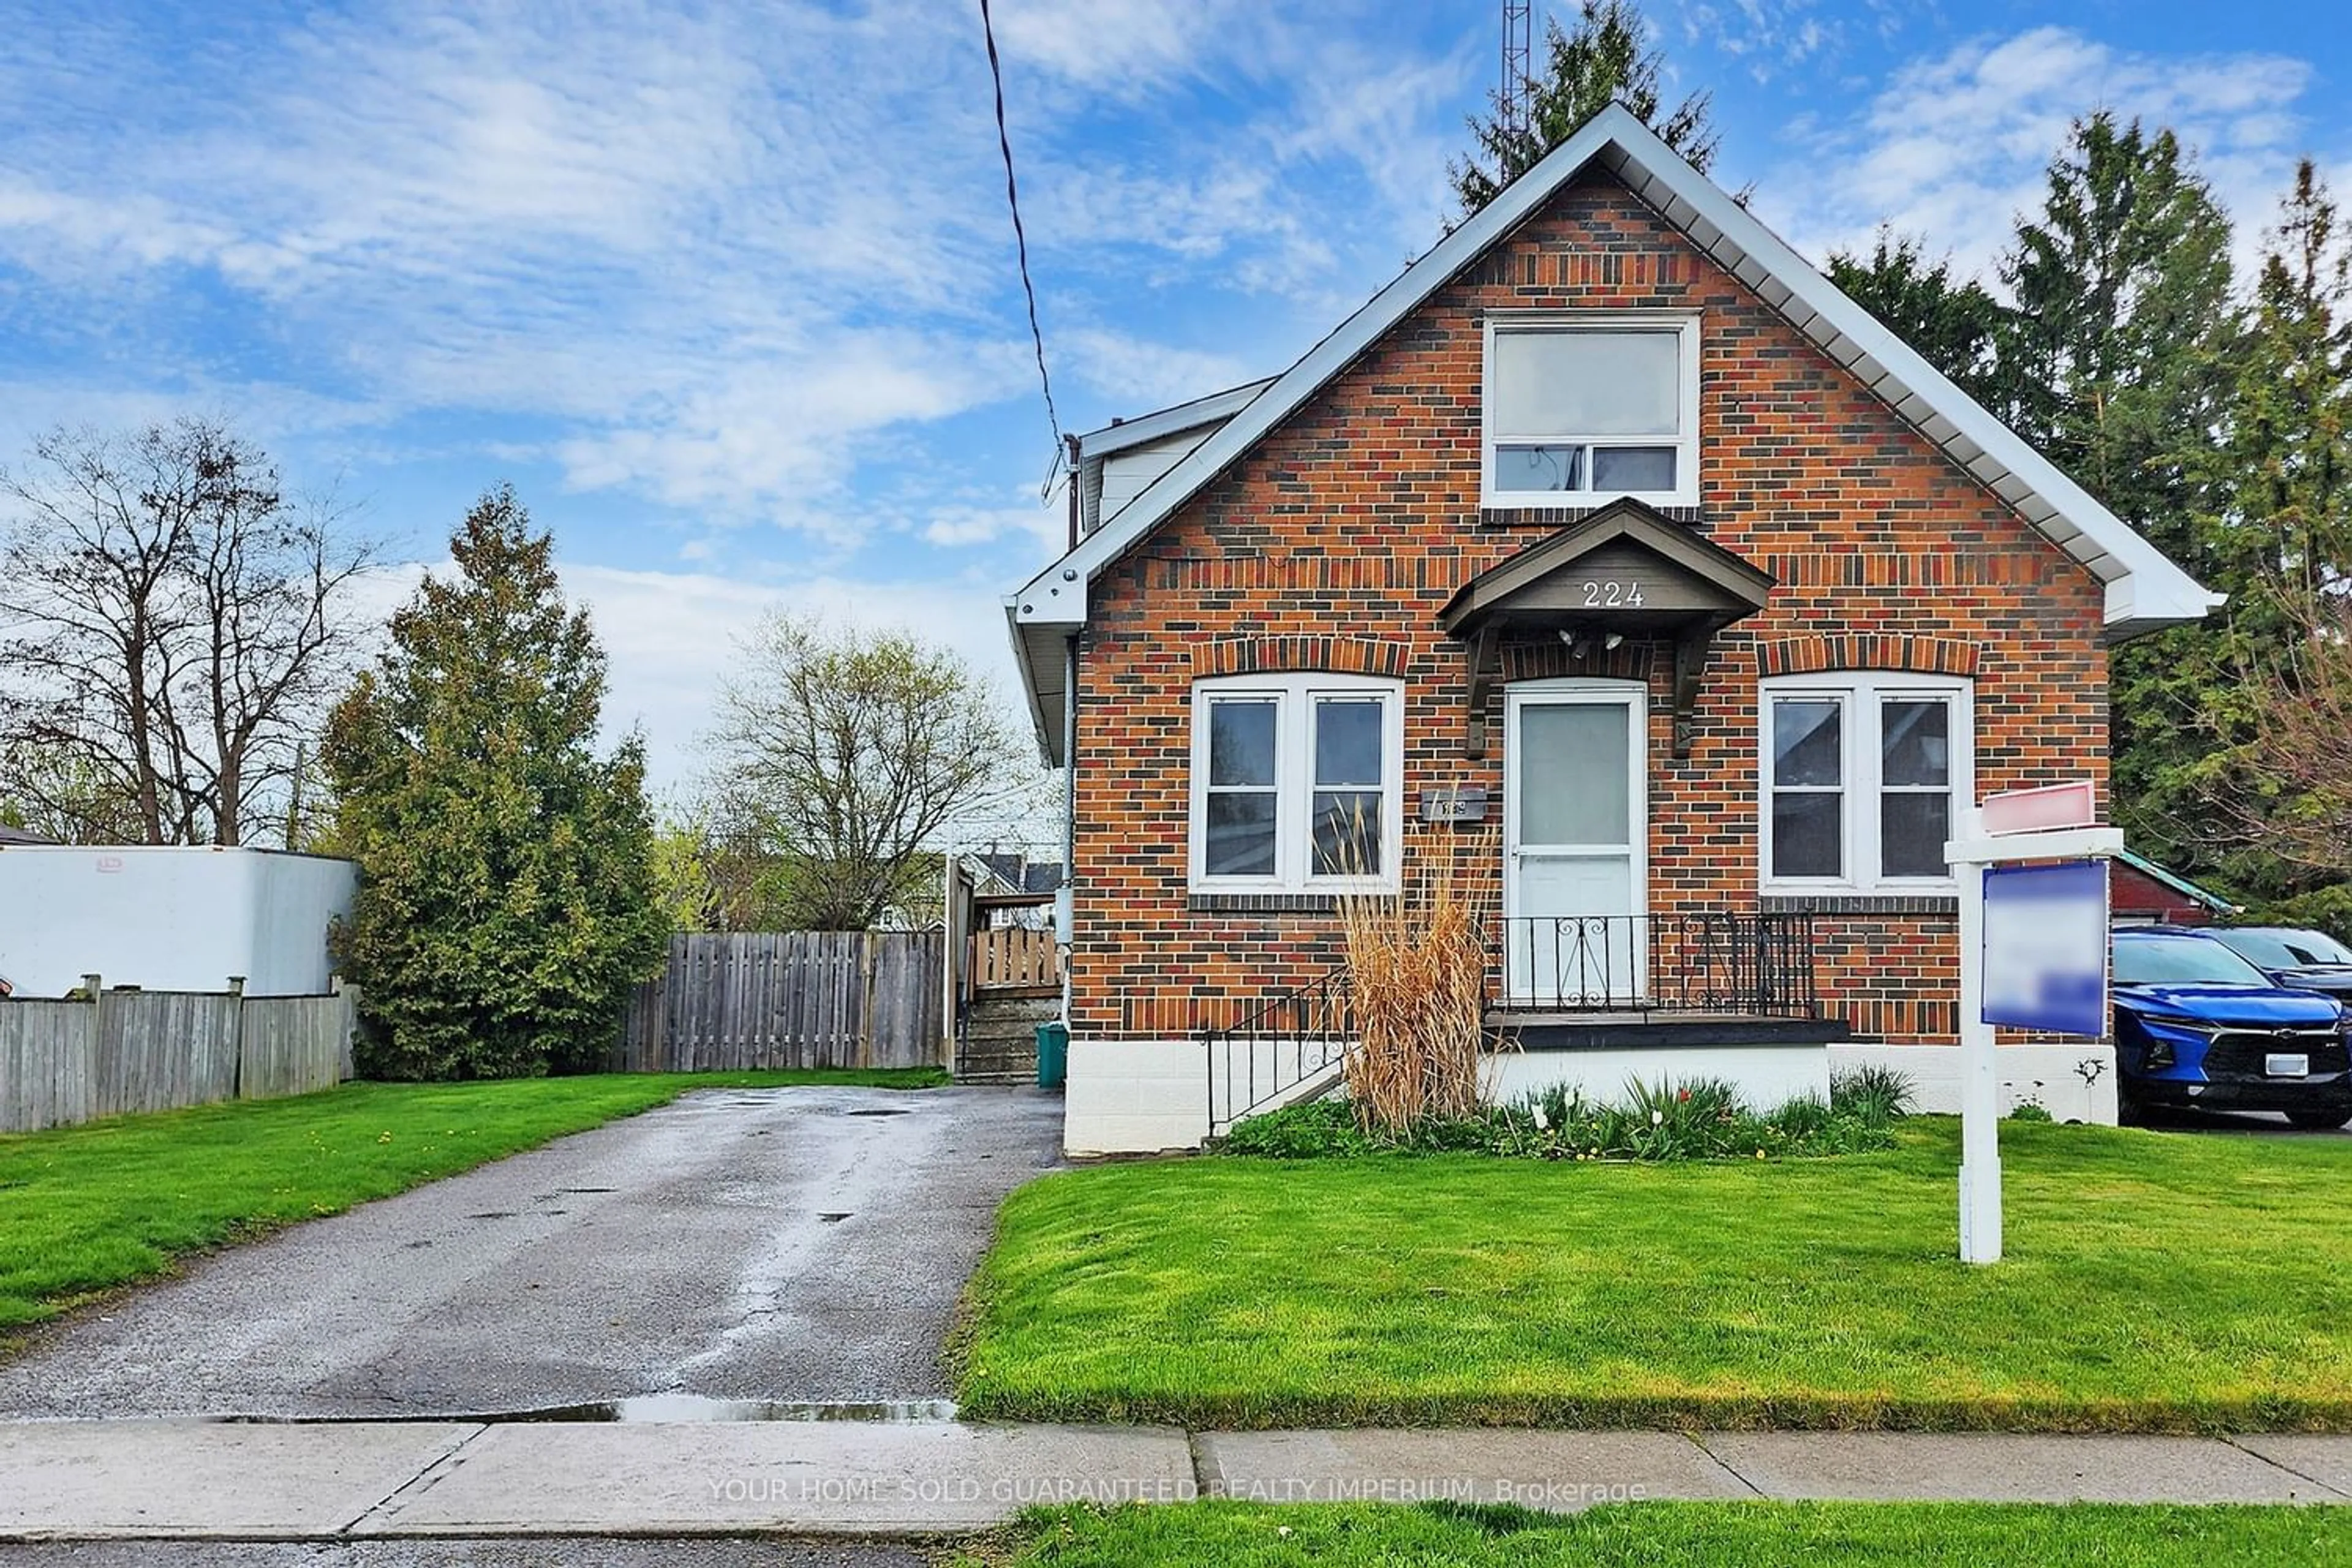 Frontside or backside of a home for 224 Beatty Ave, Oshawa Ontario L1H 3B3